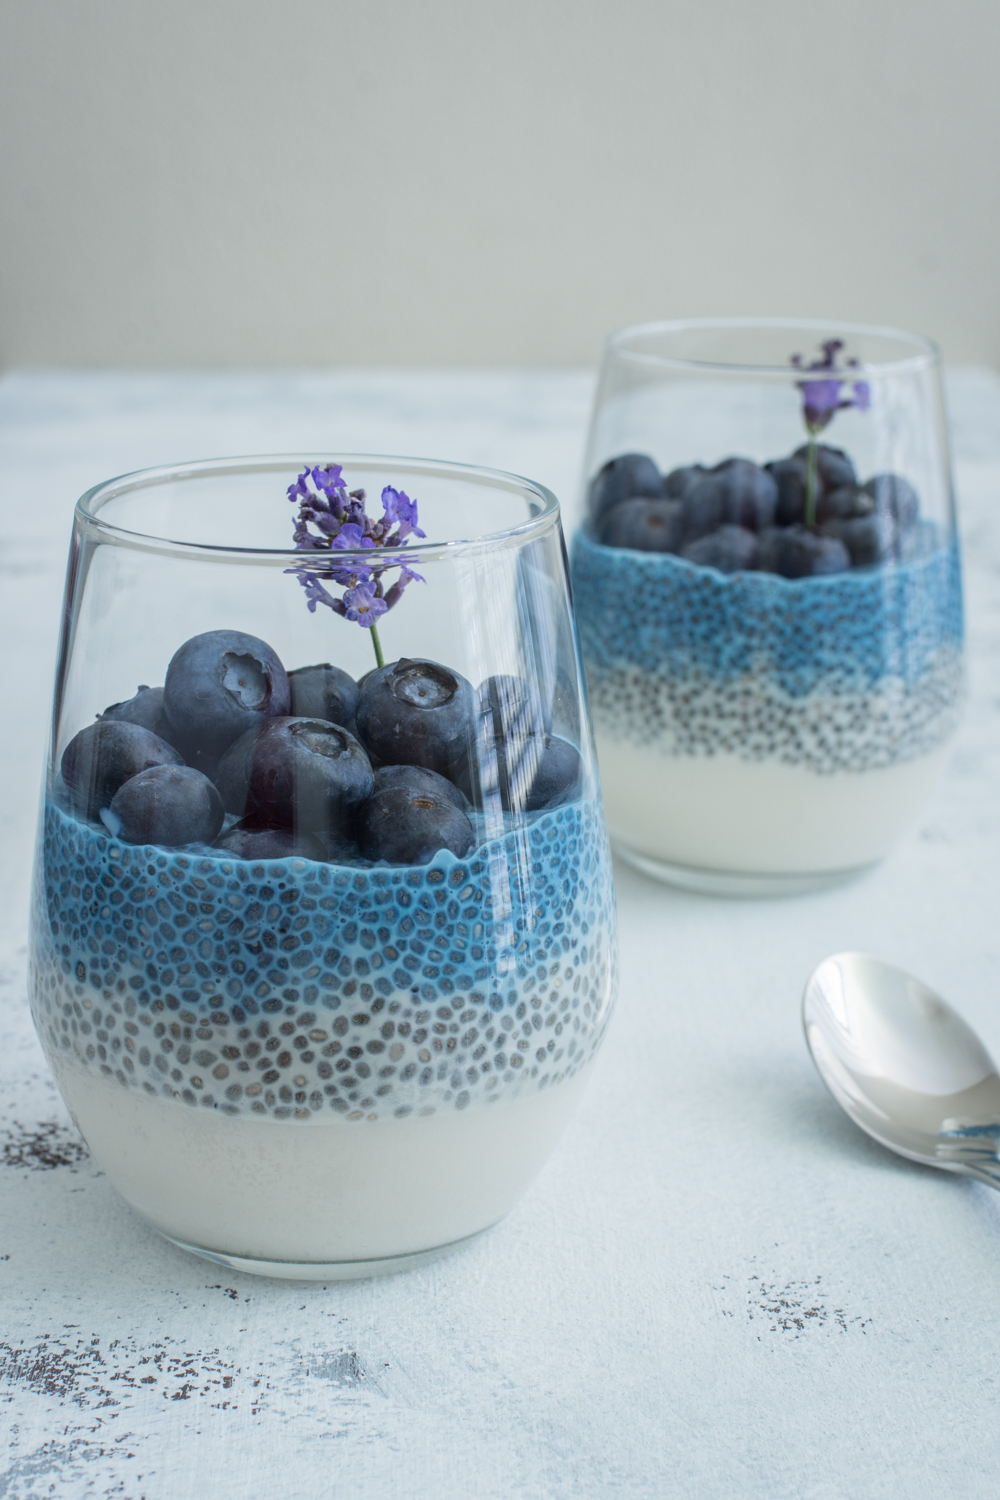 Chiapudding with blueberries